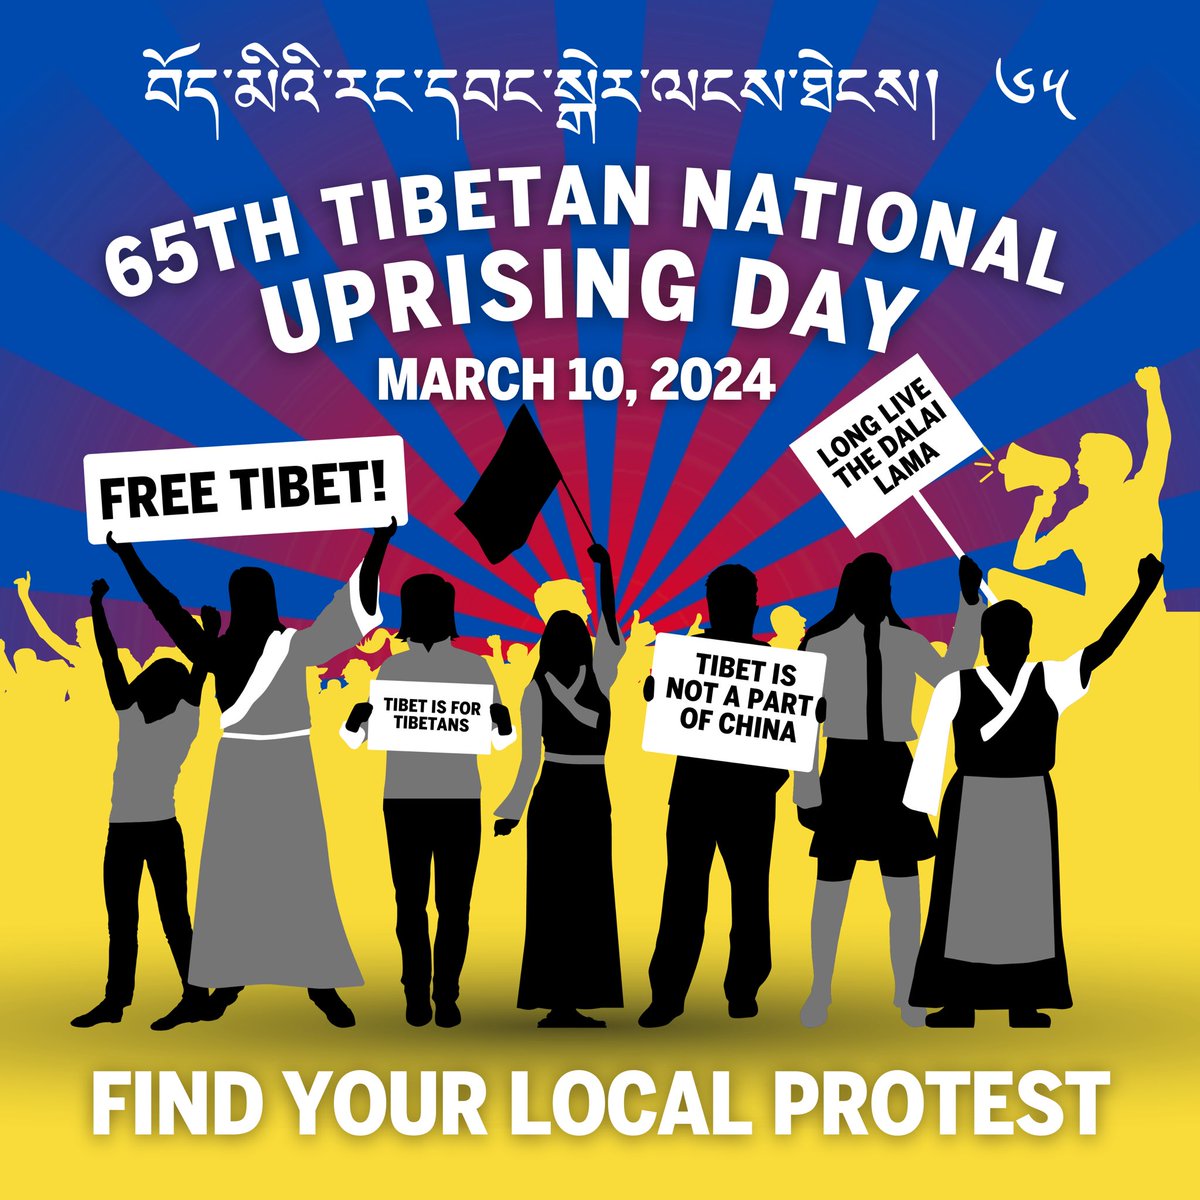 March 10 is Tibetan National Uprising Day. Every year, we commemorate the sacrifices of 1000s of Tibetans who took to the streets of Lhasa on March 10 1959 to call for Tibet's independence Please join SFT and Tibetan communities around the world at your local March 10th protest.